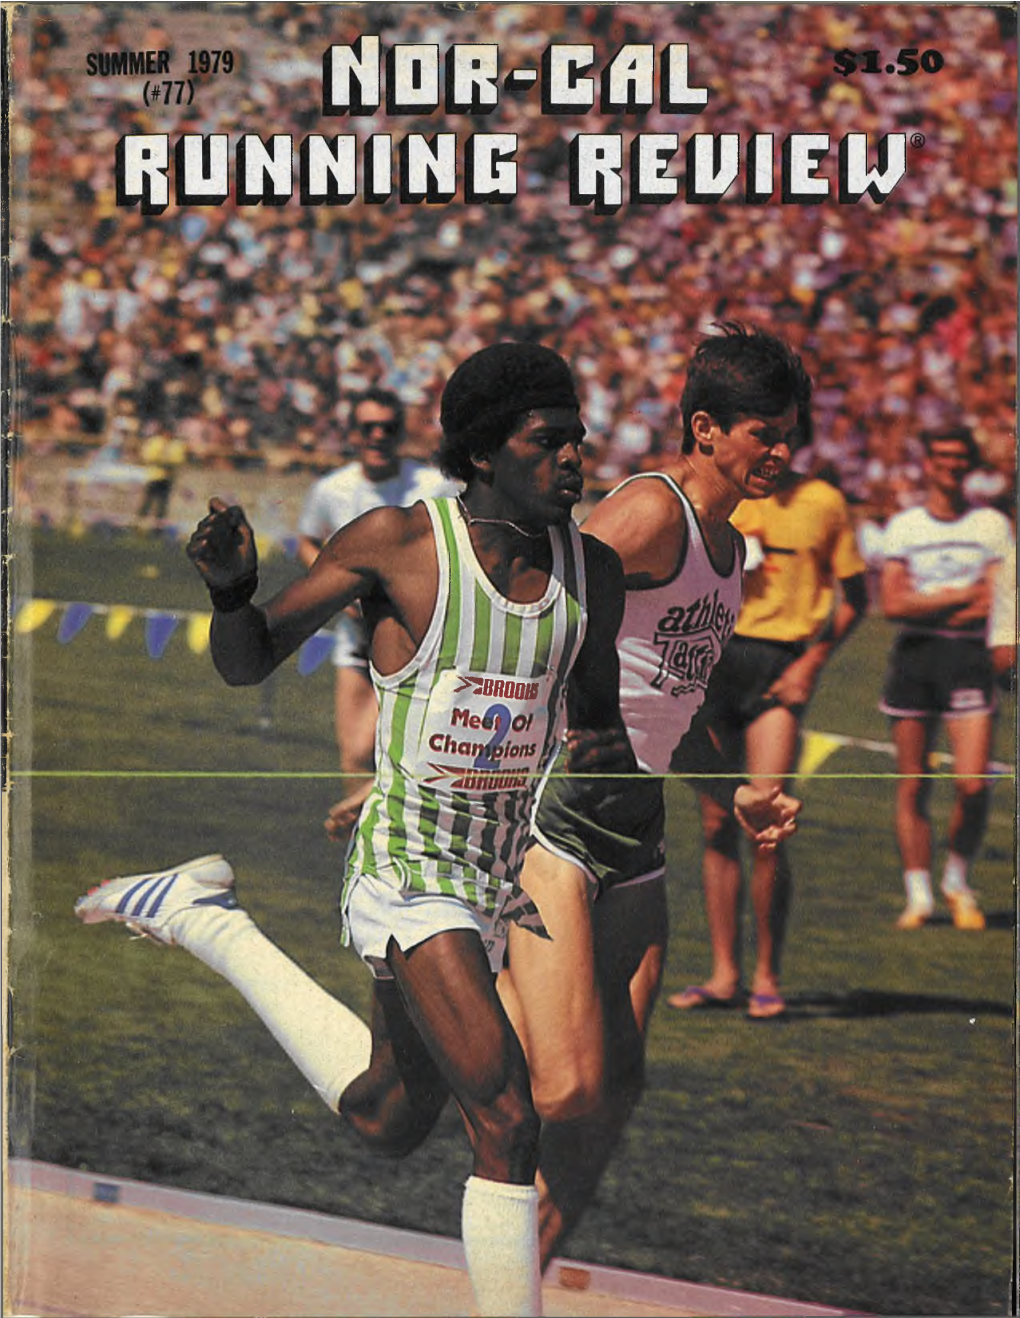 Norcal Running Review, You Can Do So by Ordering a Minimum of Ten Copies Per Issue (Must Be Shipped to the Same N O R - C a L Address)